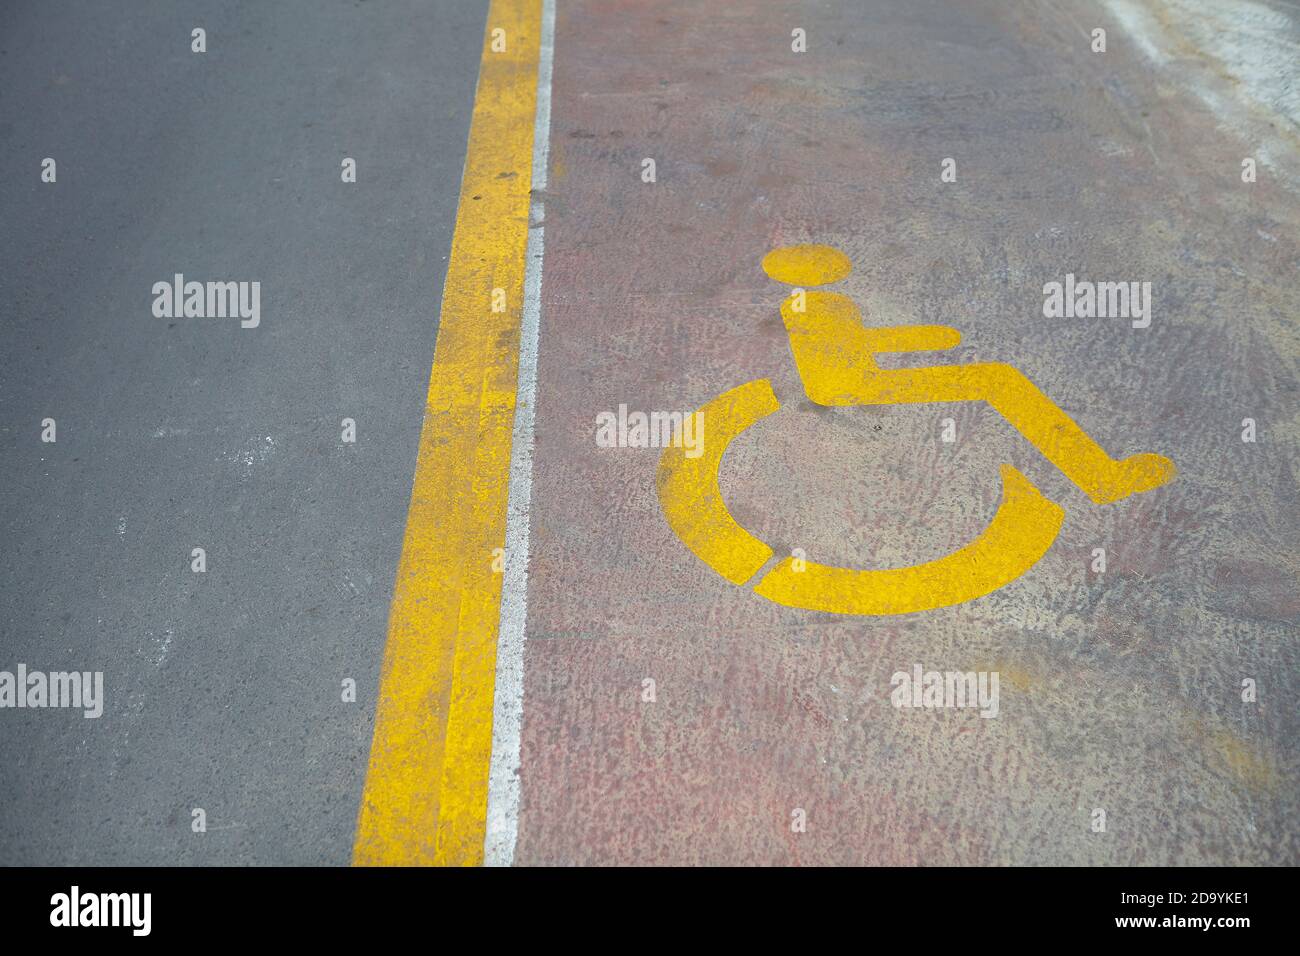 disability logo on the road Stock Photo